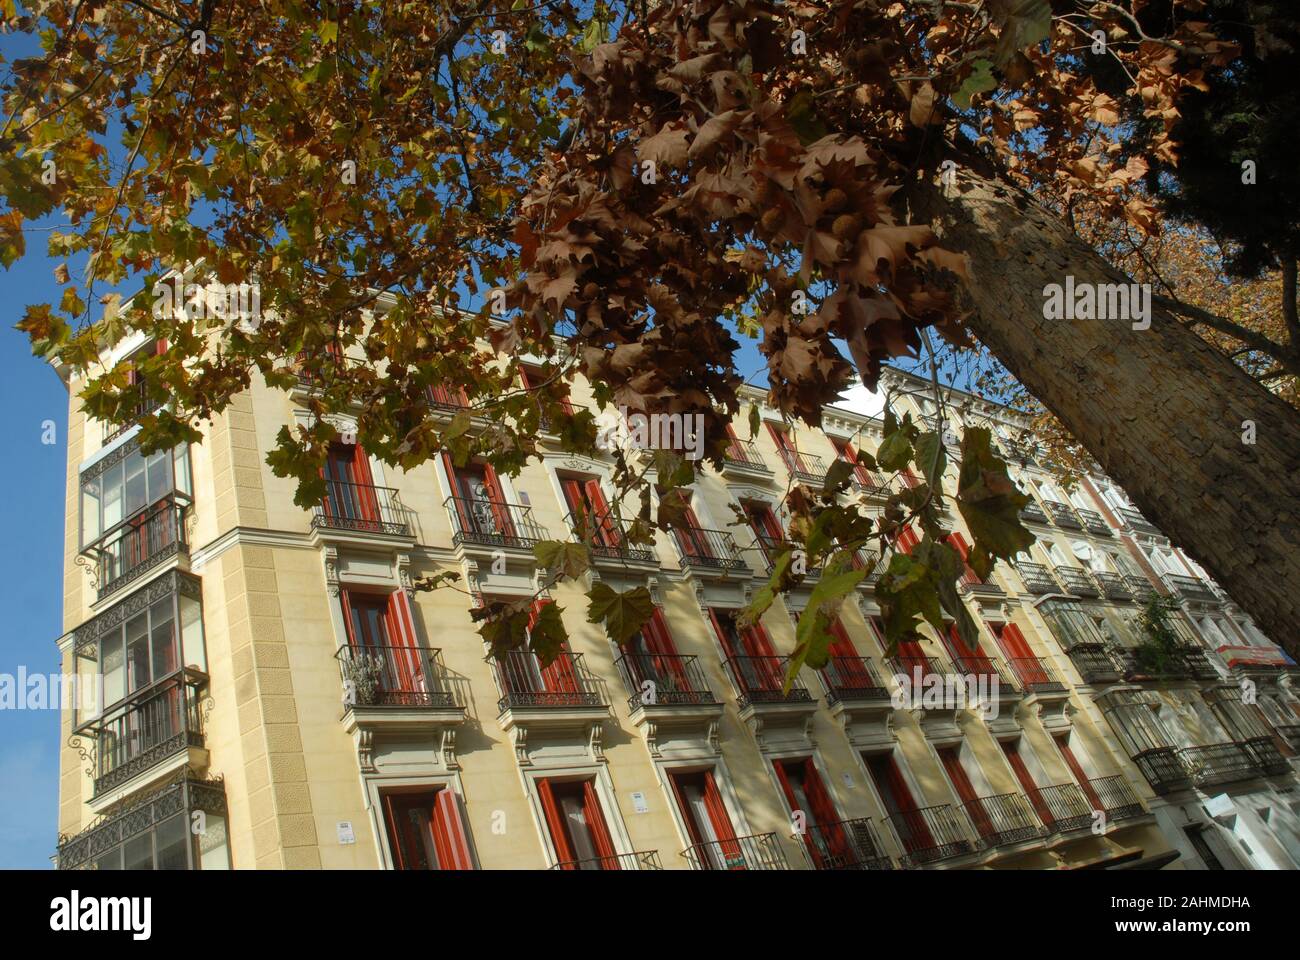 Facades of houses and trees in the winter sun, Madrid, Spain. Stock Photo